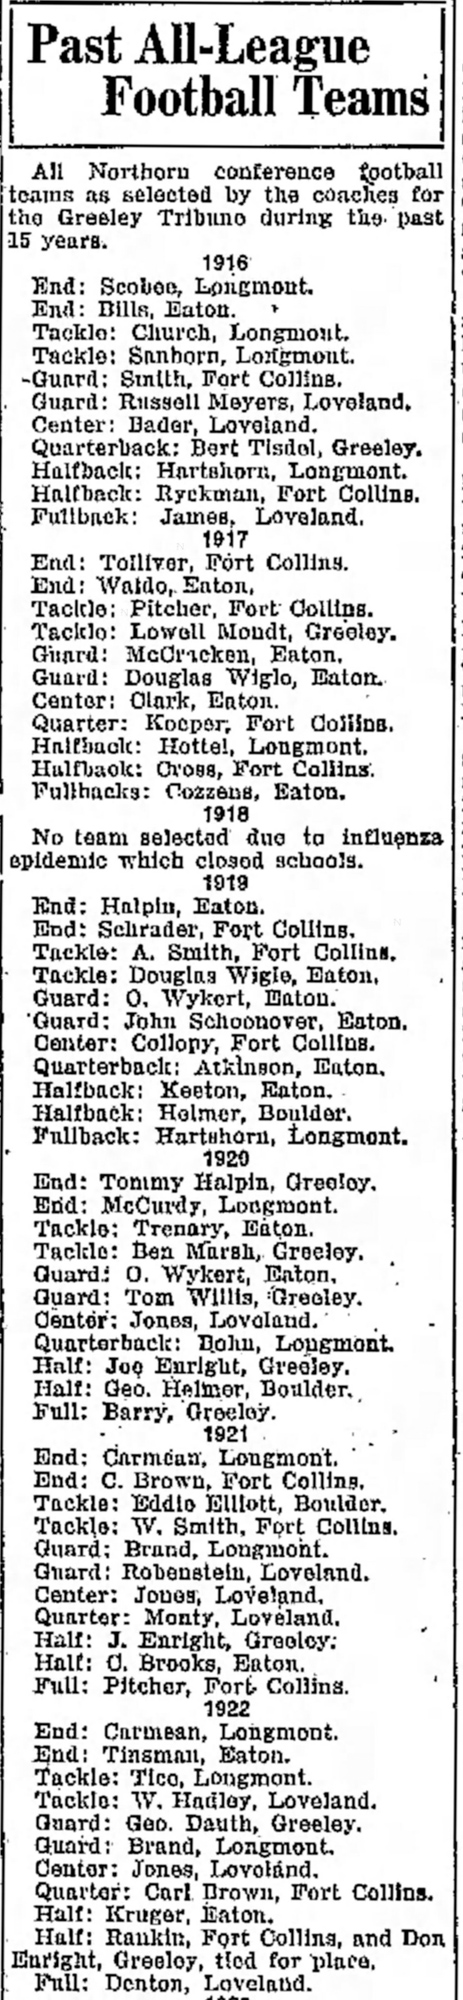 Dauth Family Archive - 1930-11-18 - Greeley Daily Tribune - June Dauth on 1922 All League Football Team